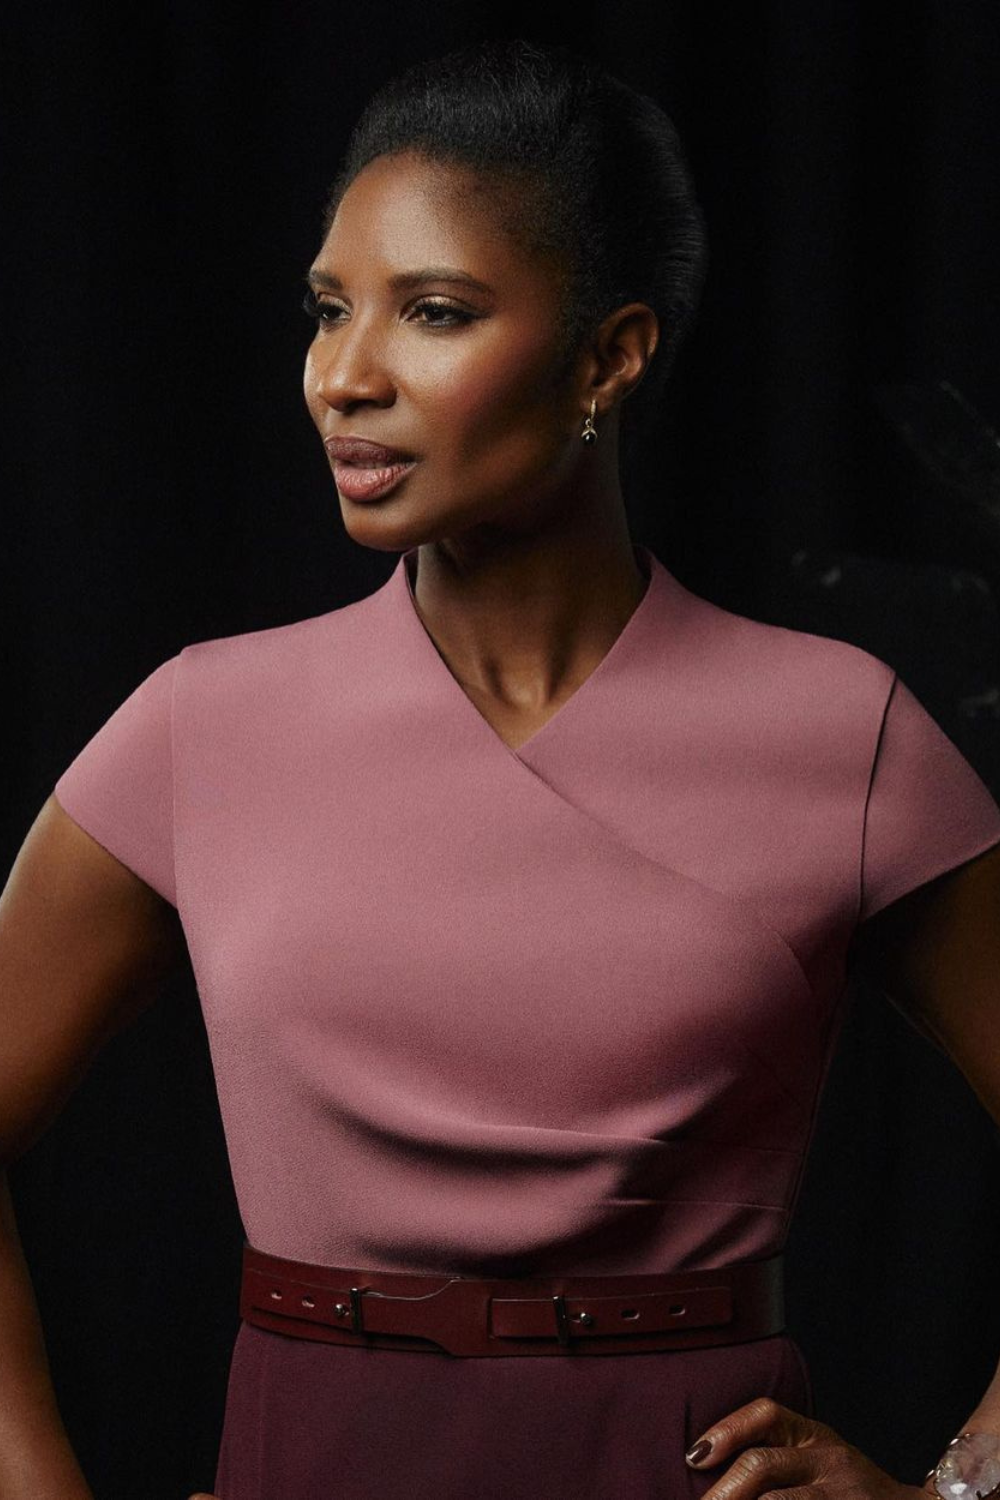 Denise Lewis, A Former Track And Field Athlete